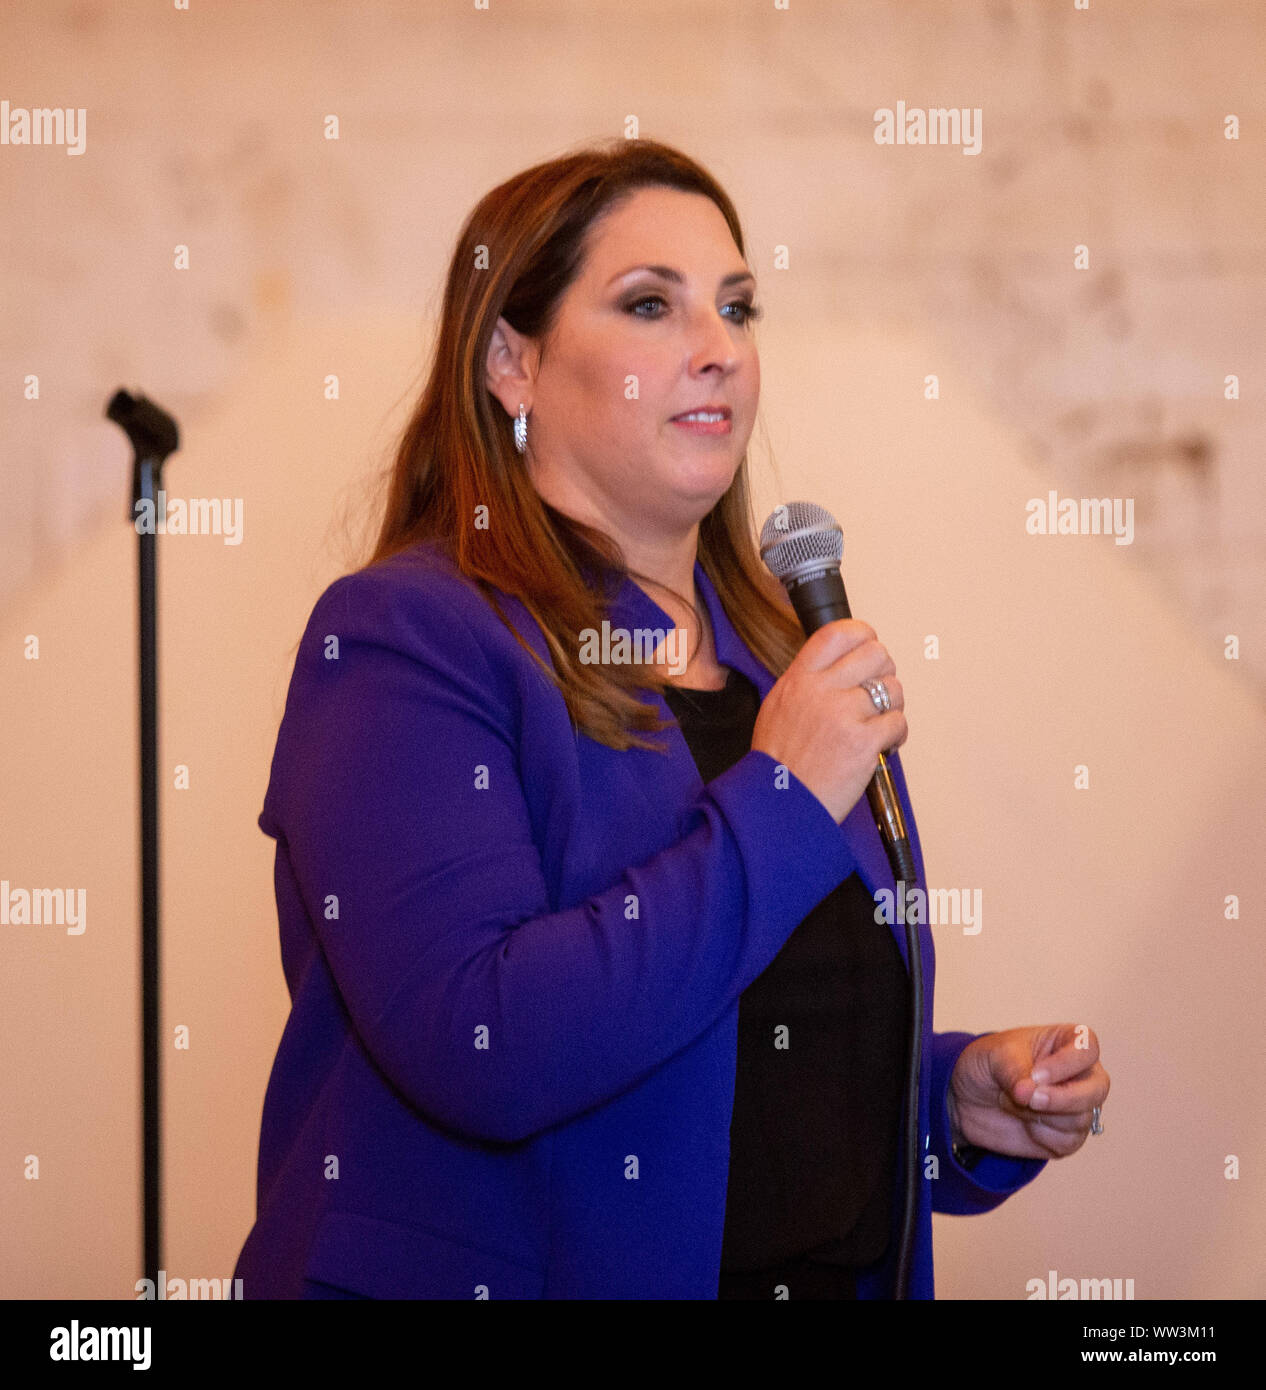 Houston, TX, USA. 12th Sep, 2019. Ronna McDaniel, Republican National Committee Chairman speaks to supporters during the Trump Campaign Celebrates Hispanics Heritage Month with Launch of 'Vamos to Victory'' Tour at Gulf Coast Distillers on Thursday, September 12, 2019 in Houston. Photo by: Juan DeLeon/Zuma Press. Credit: Juan DeLeon/ZUMA Wire/Alamy Live News Stock Photo